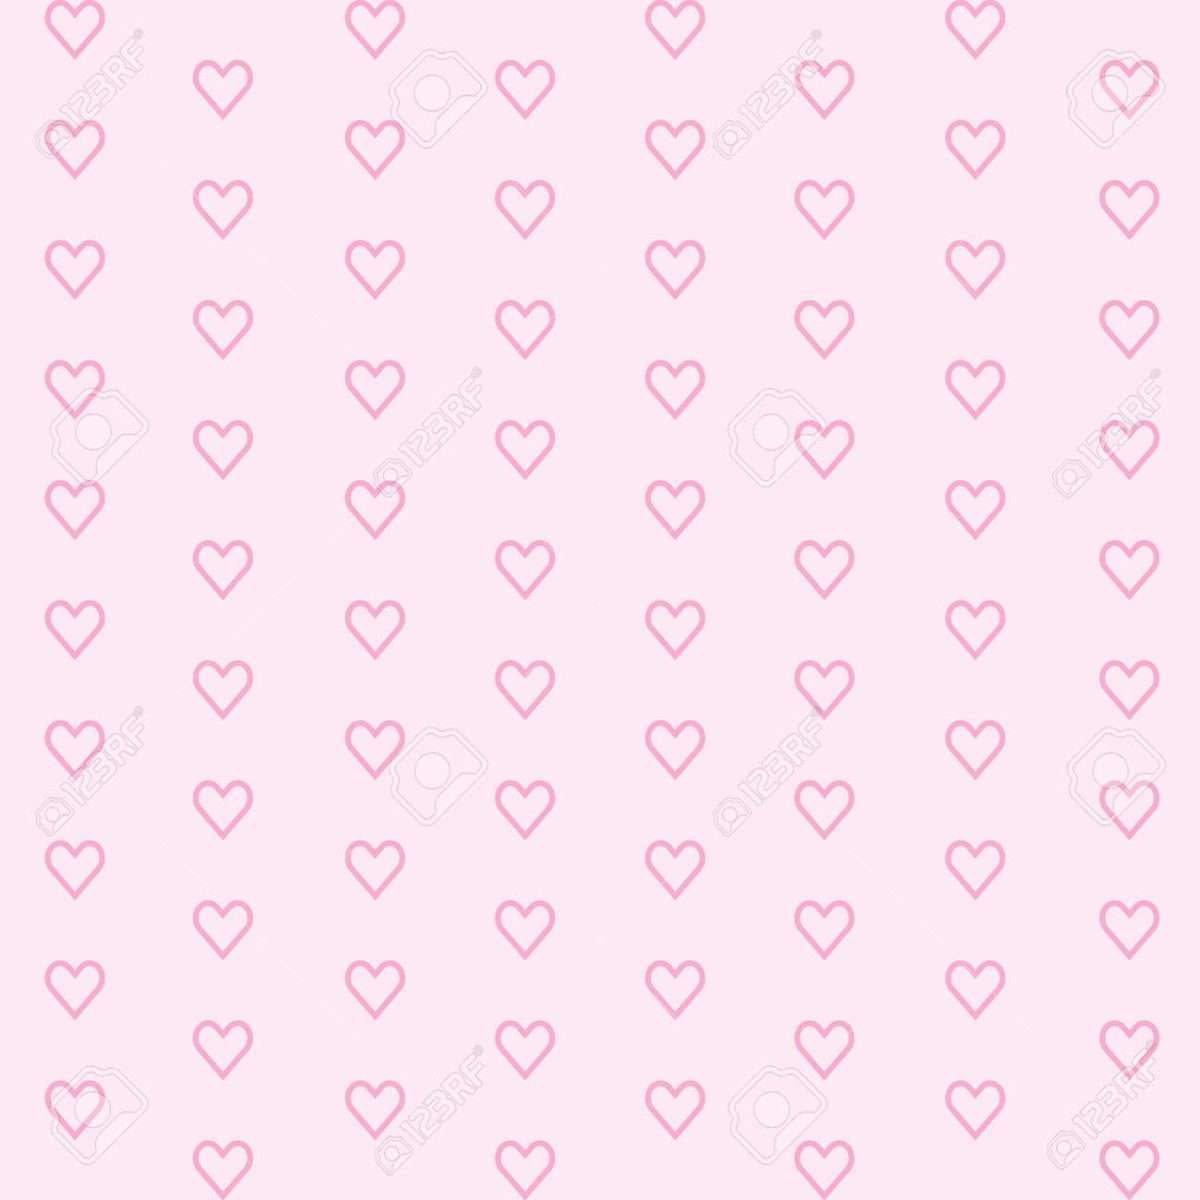 122158454-pink-background-with-hearts-for-web-page-backgrounds-textile-designs-fills-banners